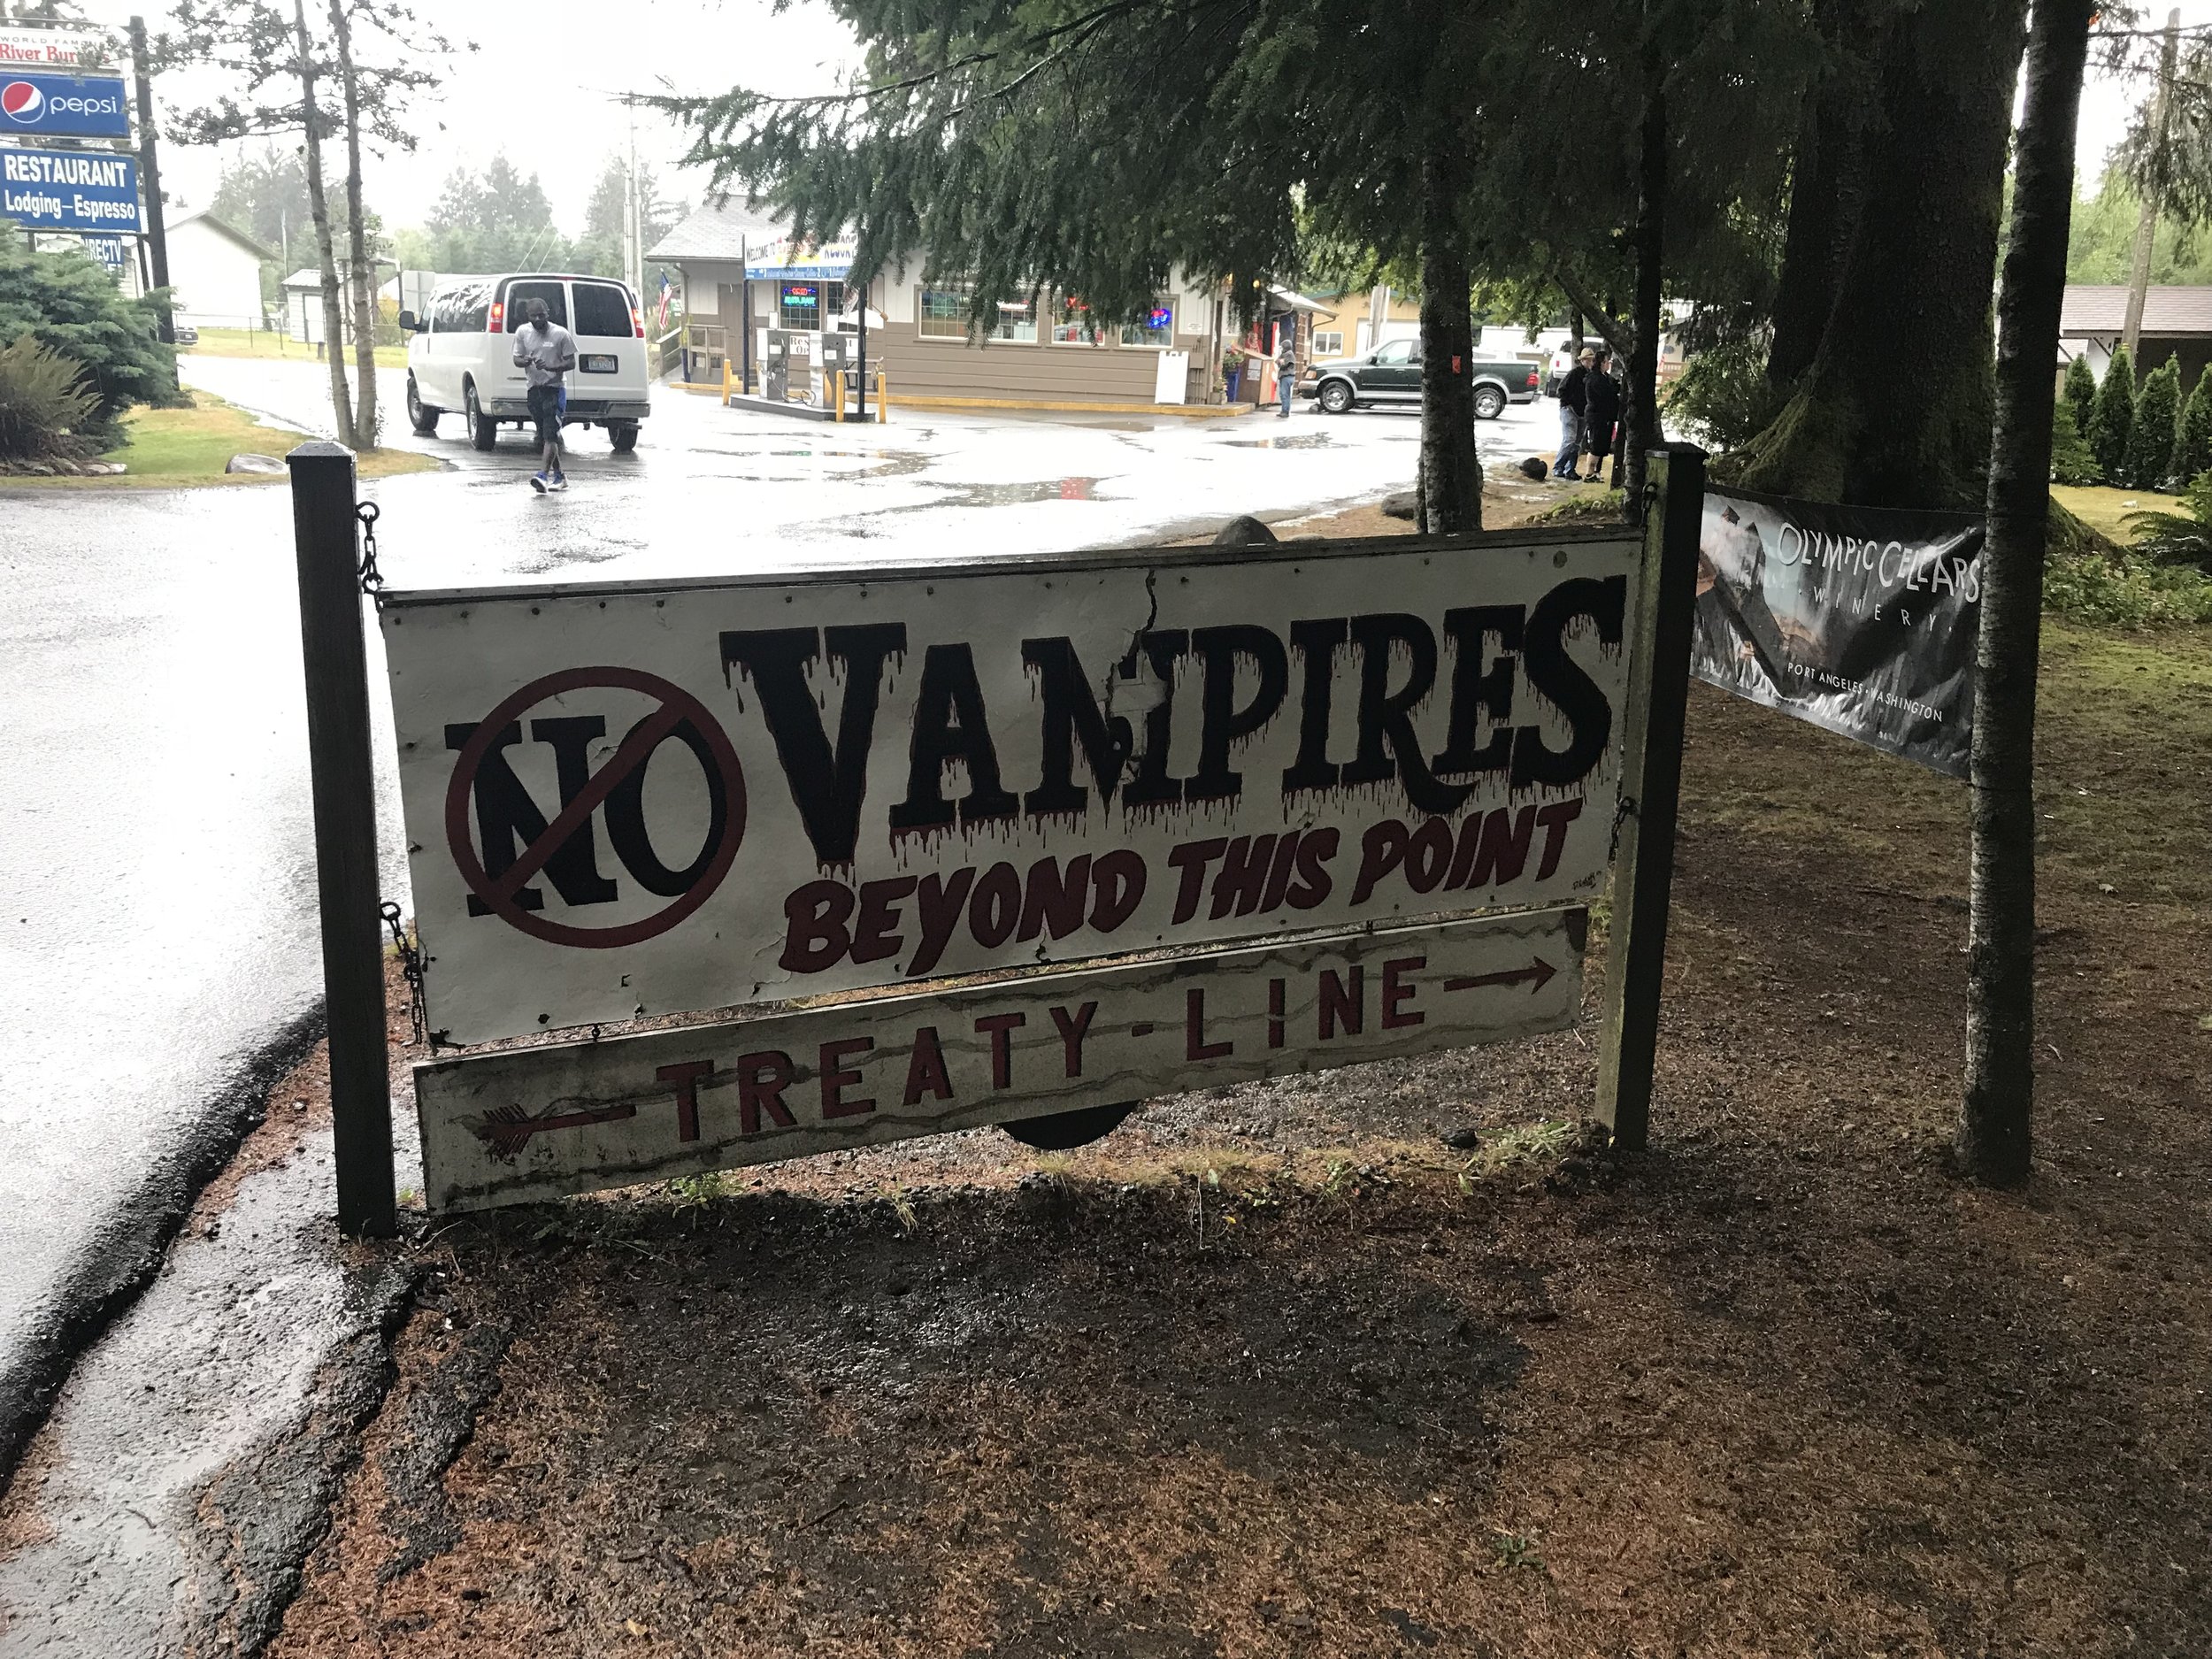  A sign near Forks, Wash., the setting for the “Twilight” series of novels and films, marks the boundary between territories controlled by vampires and werewolves.      